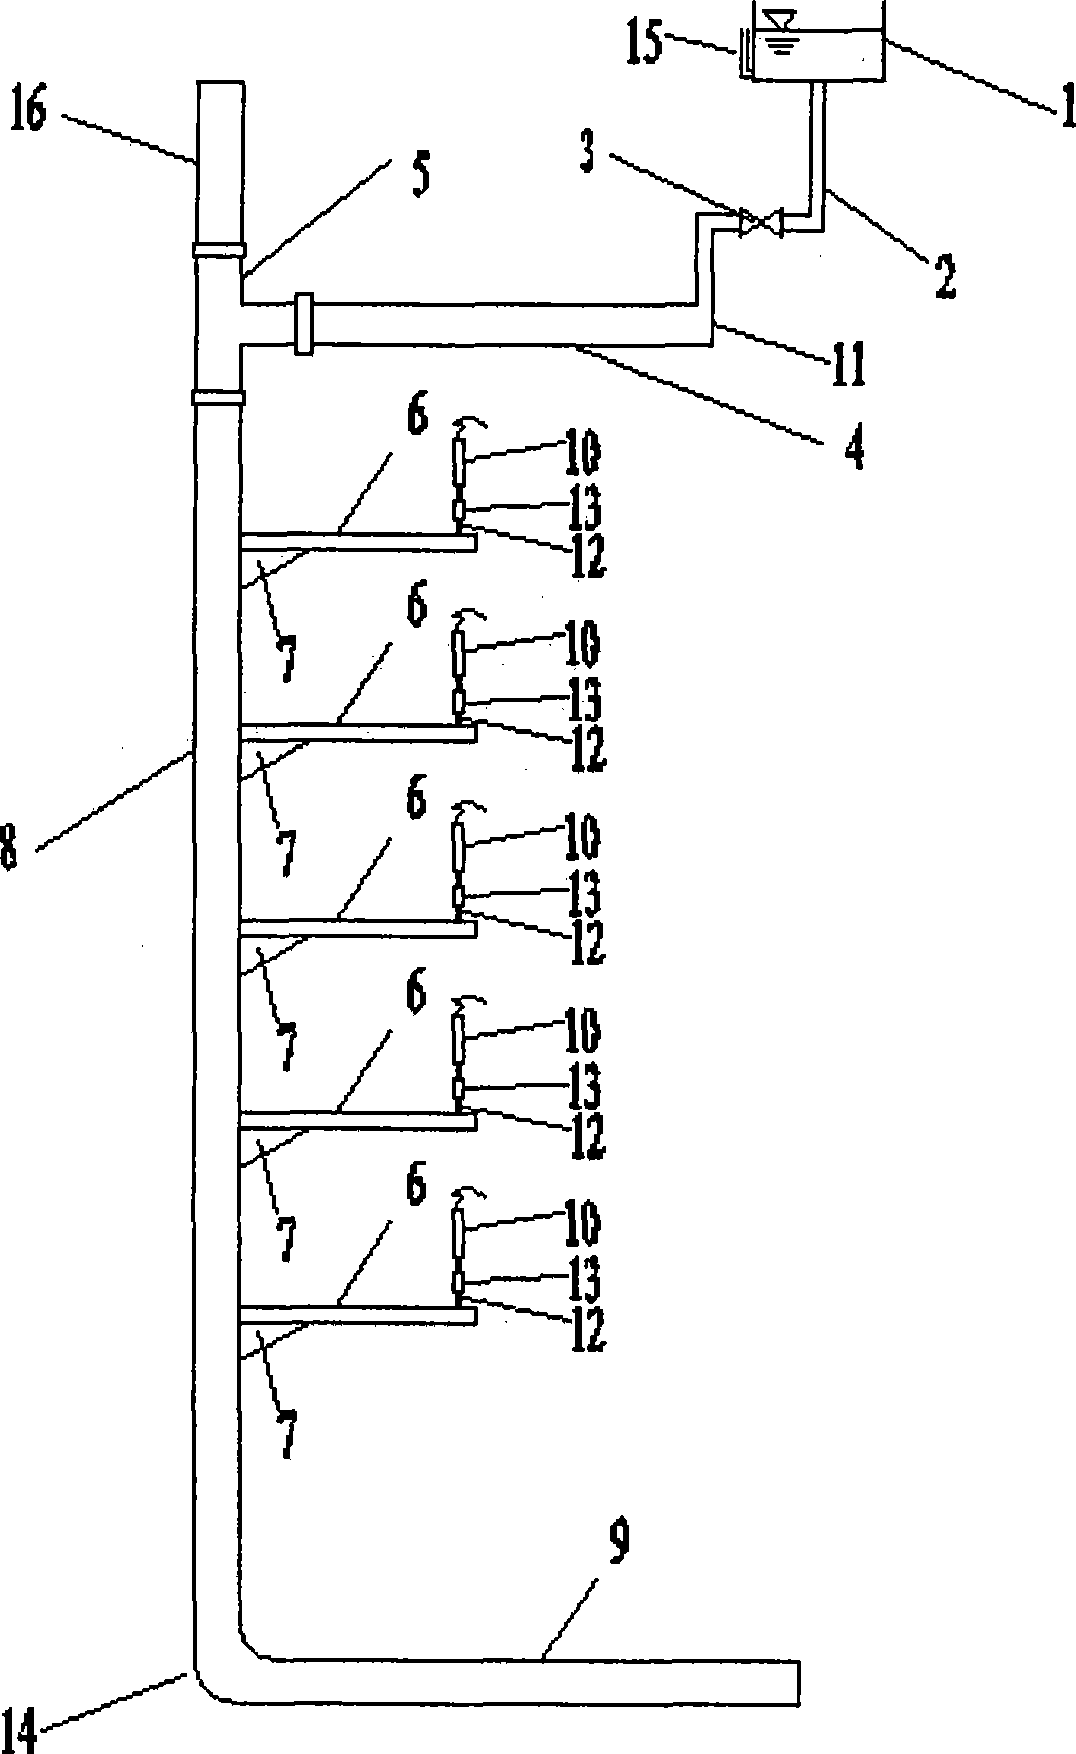 Air pressure fluctuation test method and apparatus for drainage system